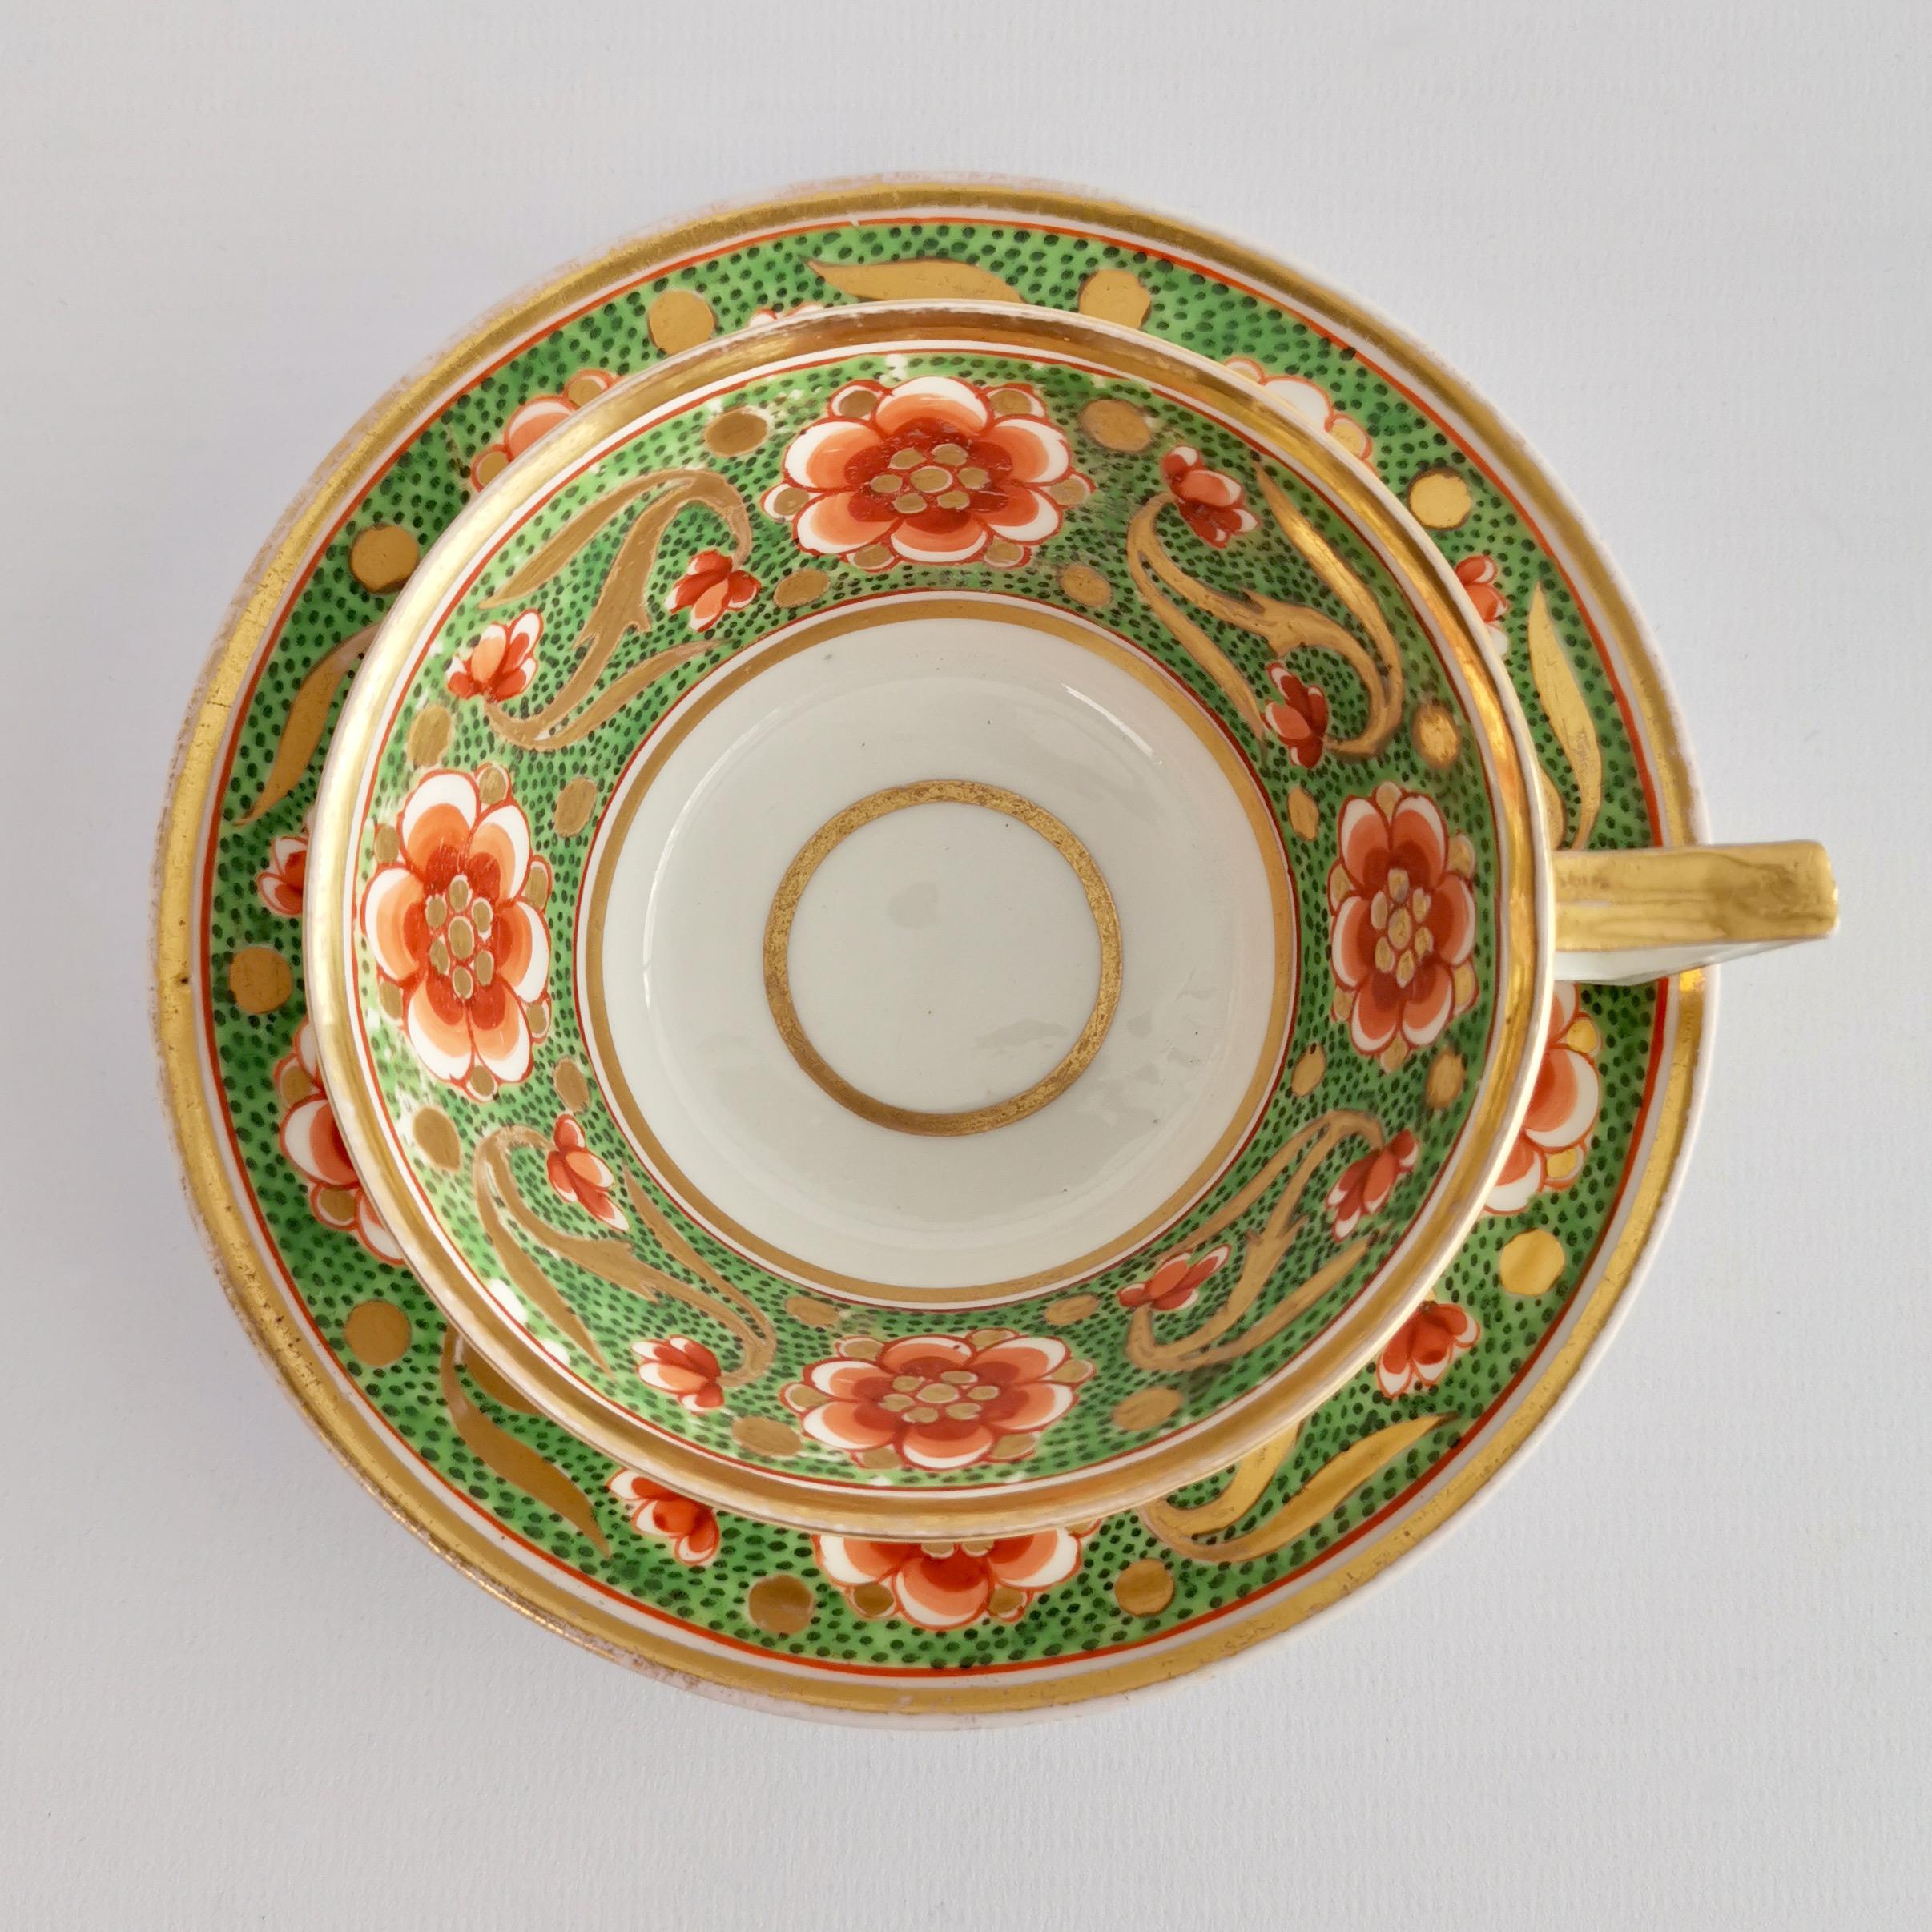 Regency Derby Porcelain Teacup Trio, Green with Red Flowers, 1800-1810 For Sale